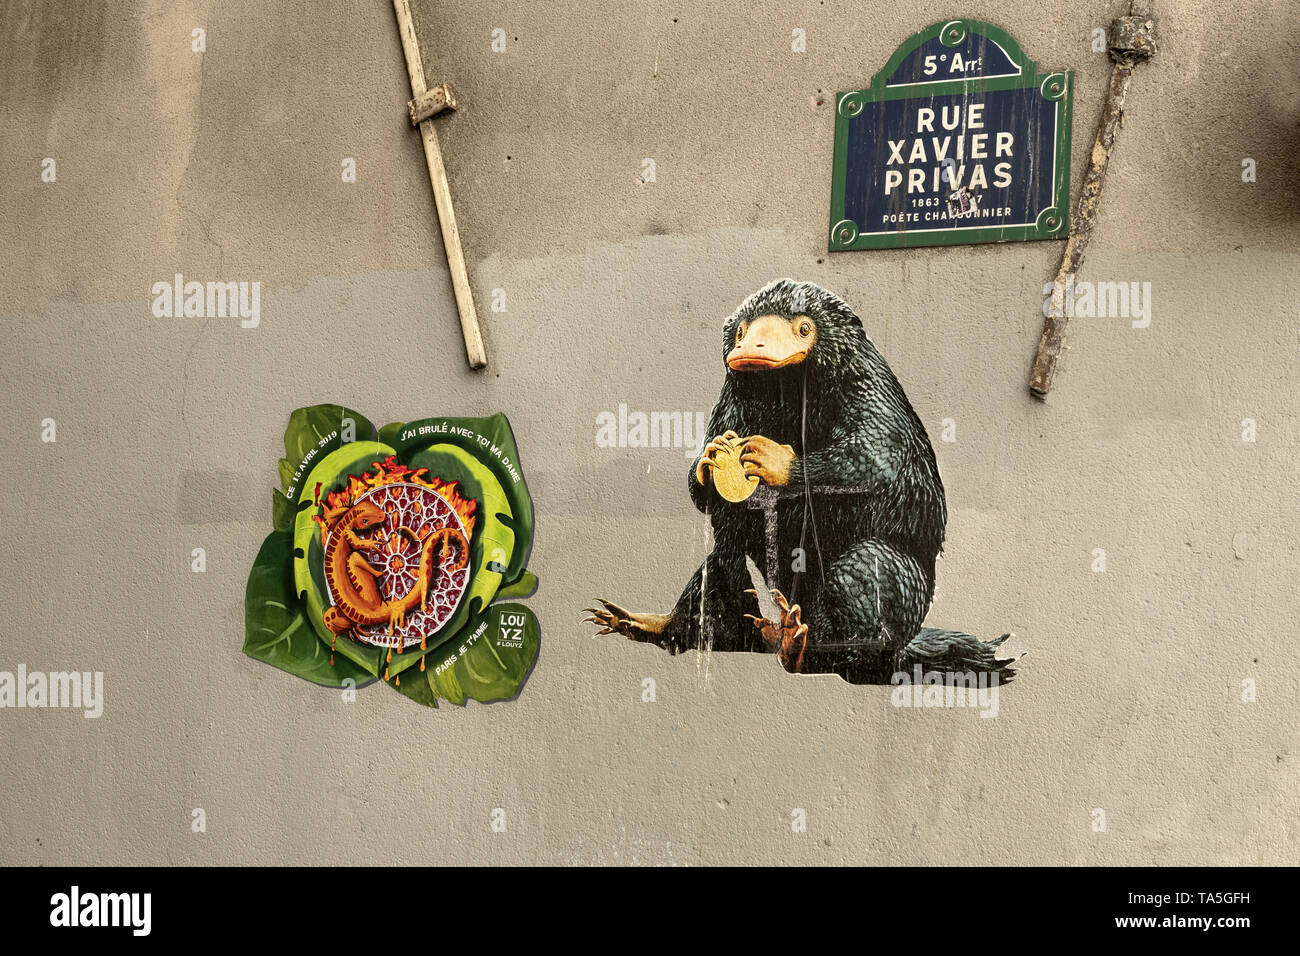 PARIS, FRANCE - APRIL 24: Street art graffiti pieces depicting (Left) a  Notre Dame cathedral burning with a lizard attached to the famous stained  gla Stock Photo - Alamy